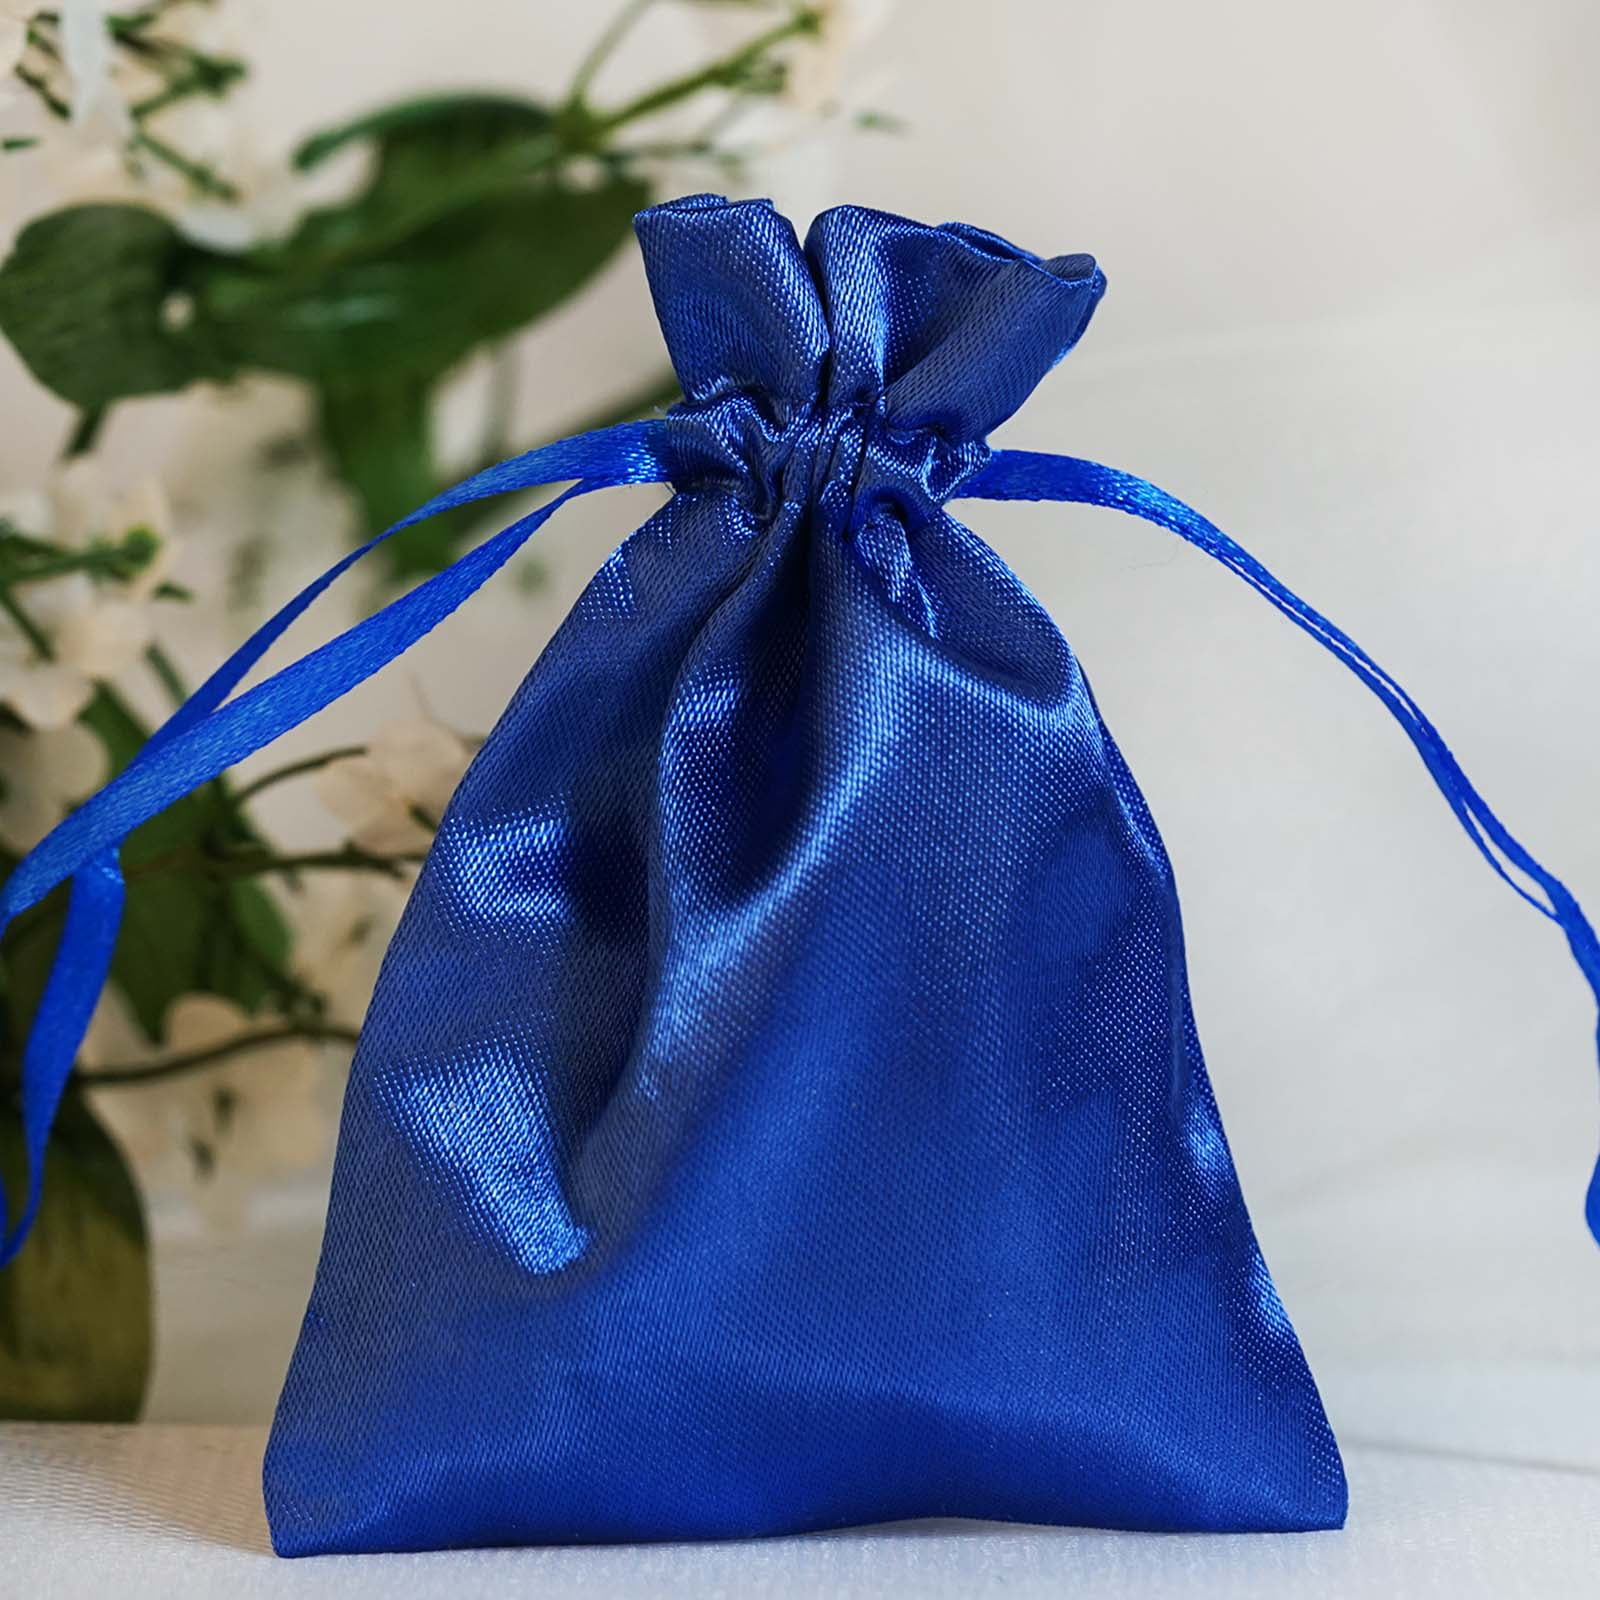 Details about   SATIN bags 4 each 4" x 6" draw string bag choose color wedding shower pouch 